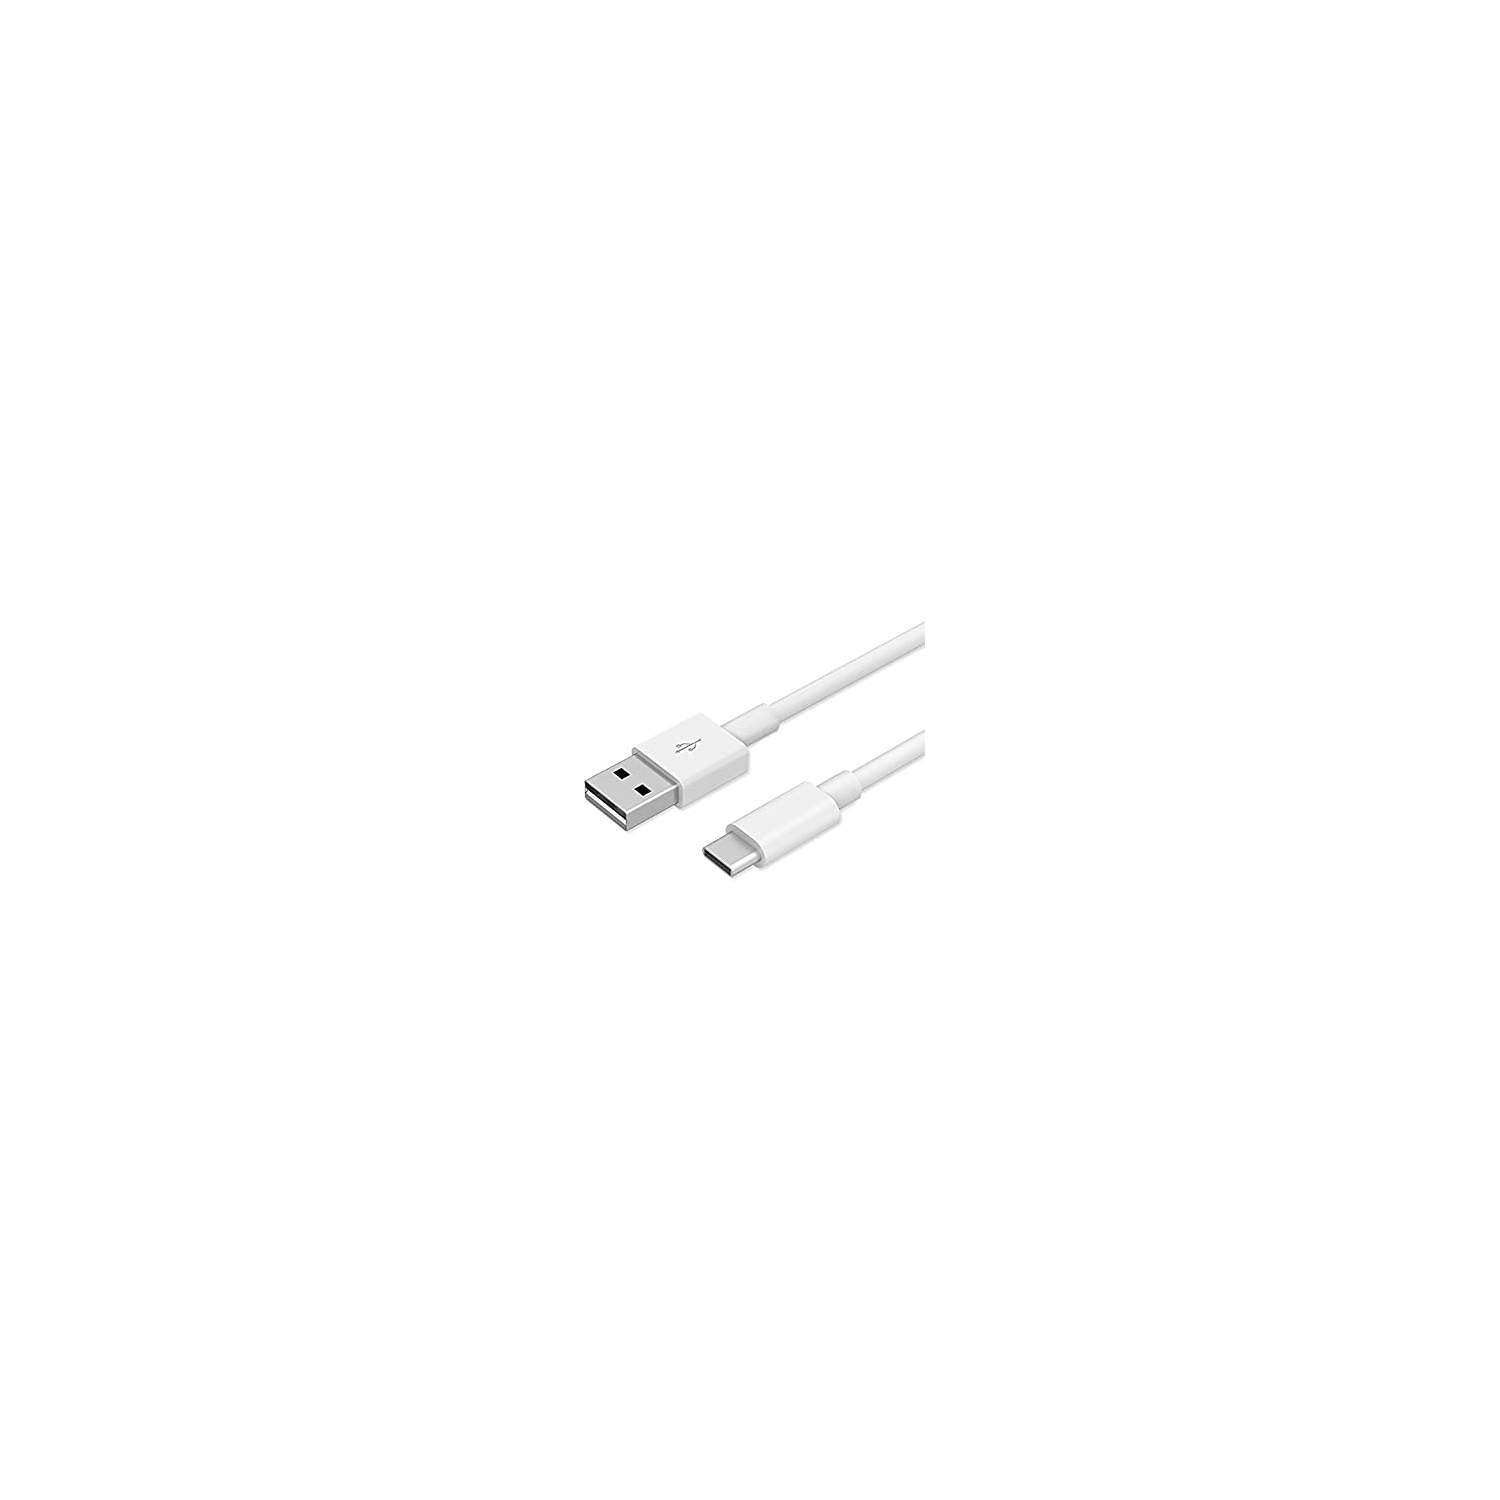 (CABLESHARK) For Huawei Compatible USB Cable Type A to Type C Sync Data Charging Cable for Huawei P9 Nexus 6 Macbook OnePlus 2 3 T